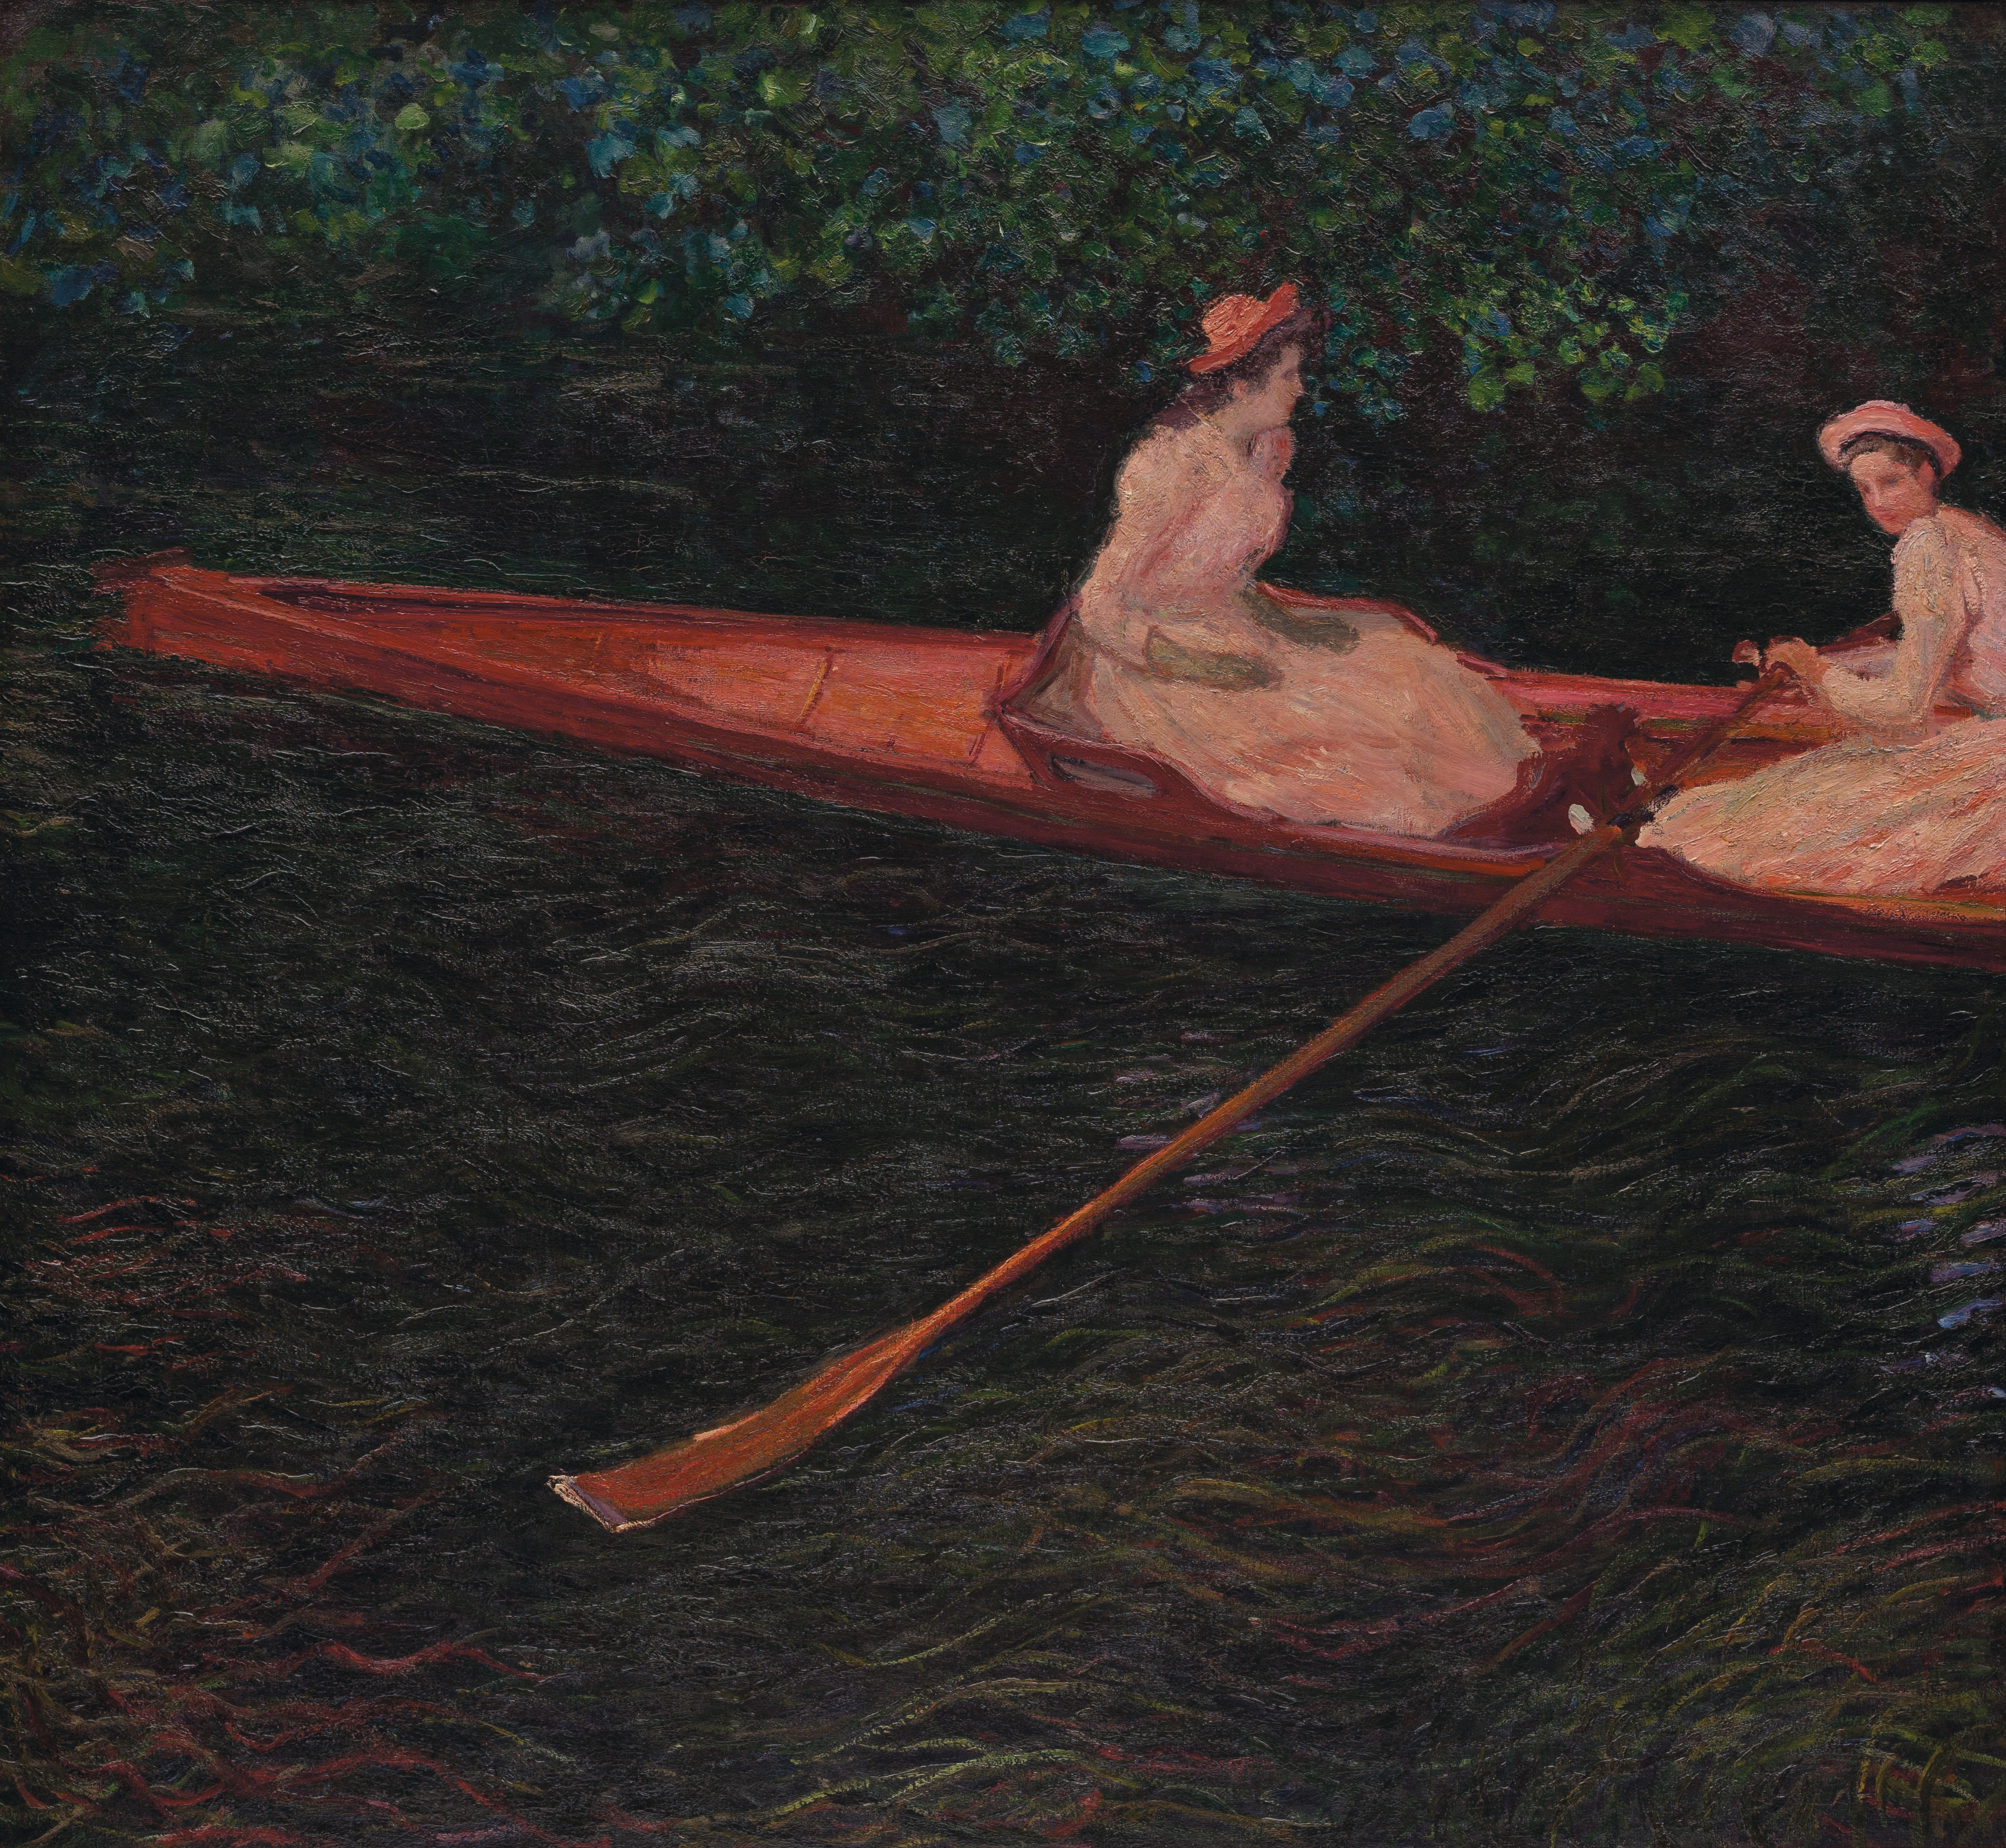 Painting of two women on a rowboat by Claude Monet. Rowing art.